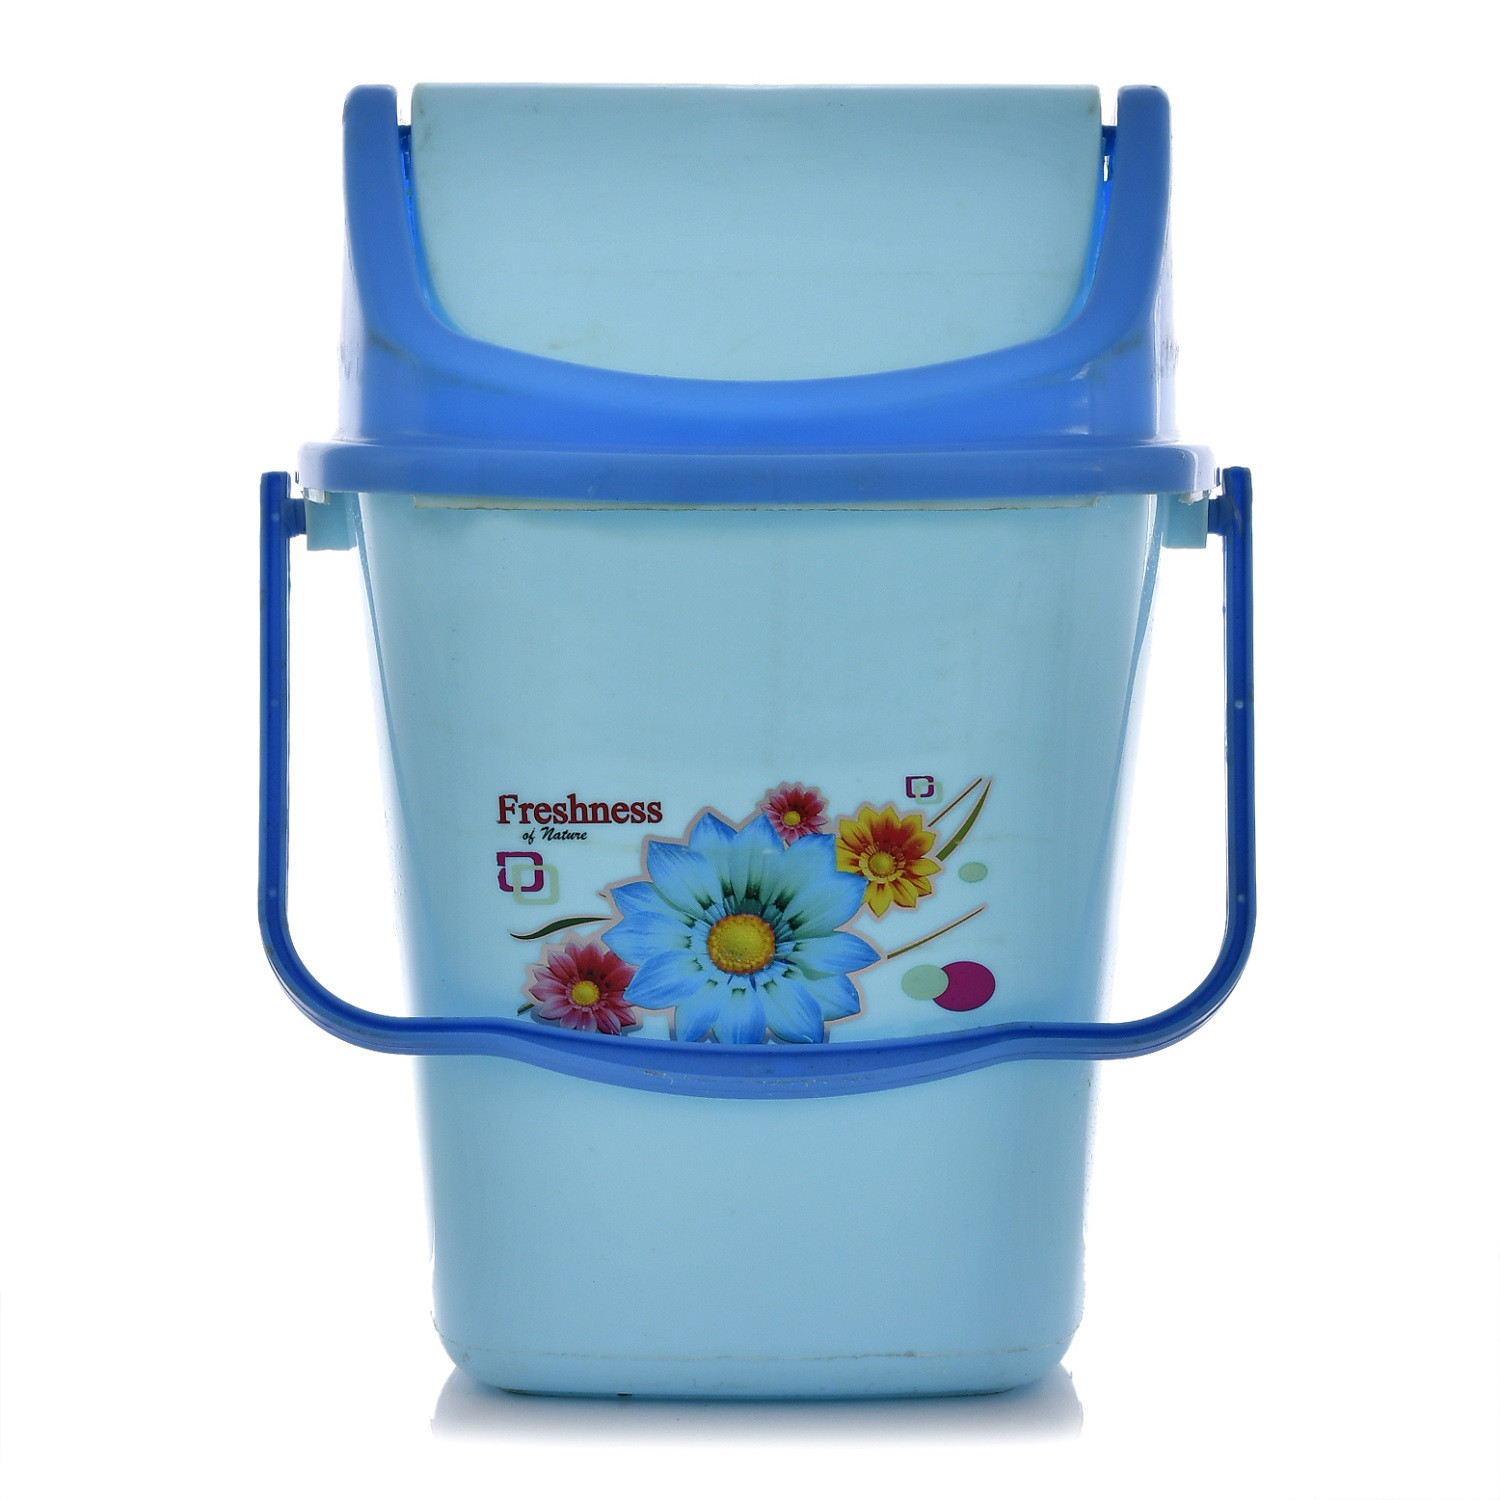 Kuber Industries Pluto Plastic Swing Printed Garbage Waste Dustbin for Home, Office with Handle, 5 Liters (Blue)-KUBMART3088